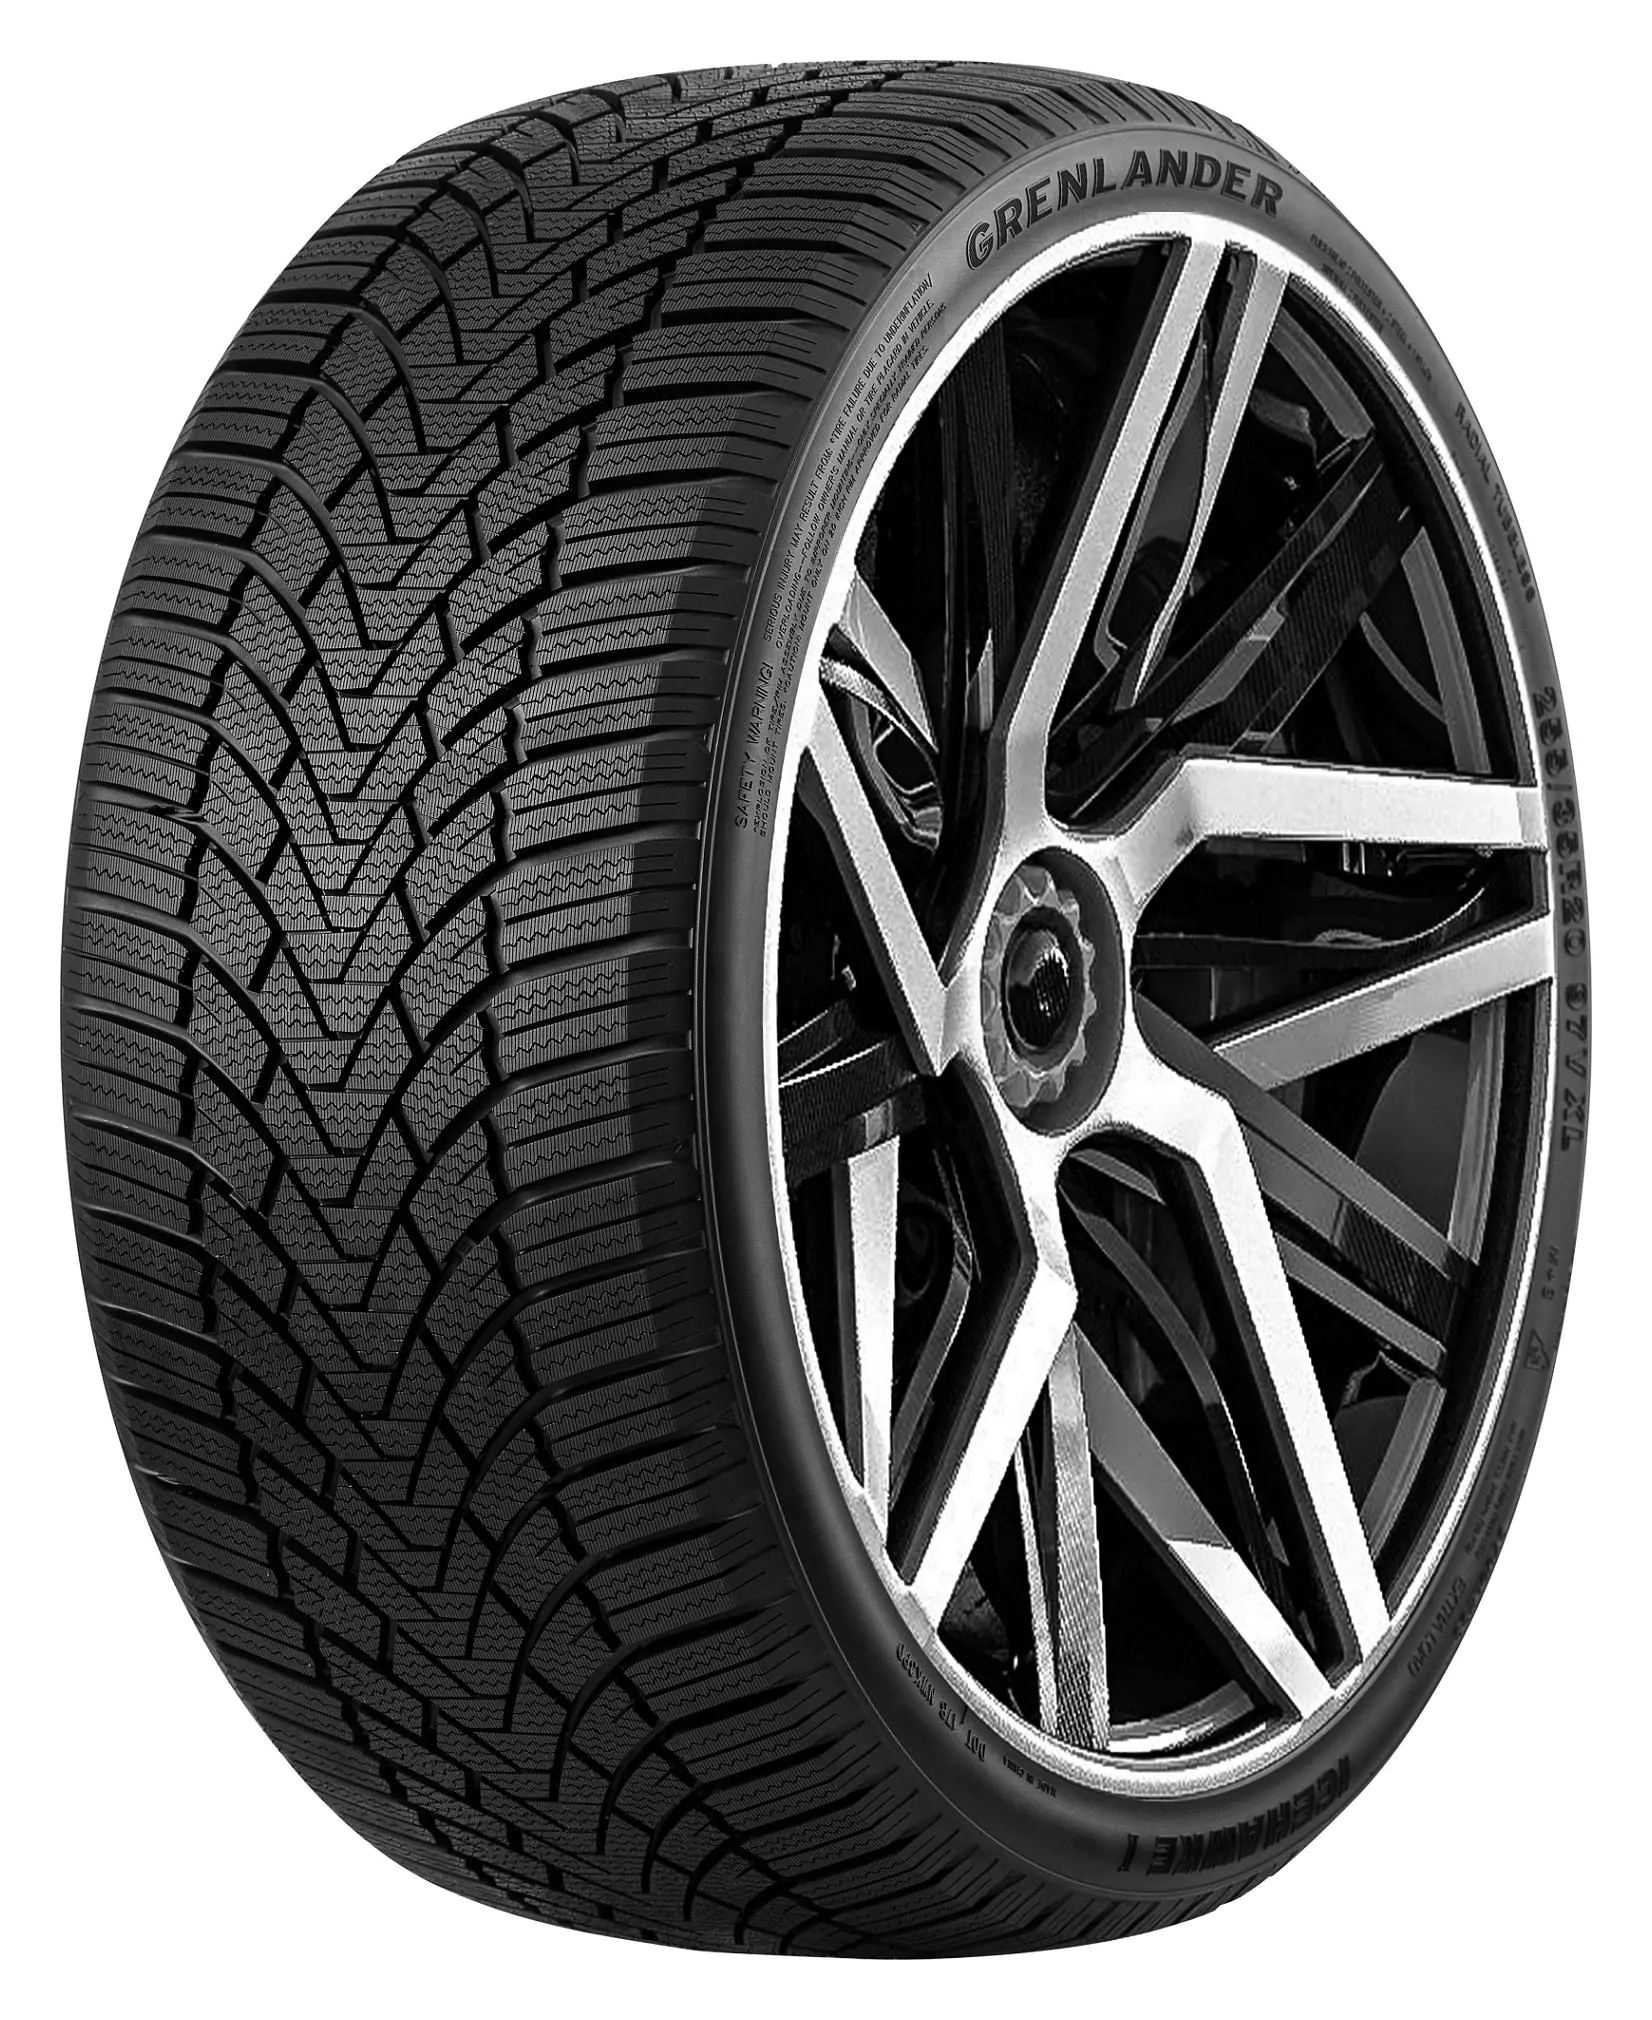 Gomme 4x4 Suv Grenlander 235/55 R20 105H Icehawke1 XL M+S Invernale